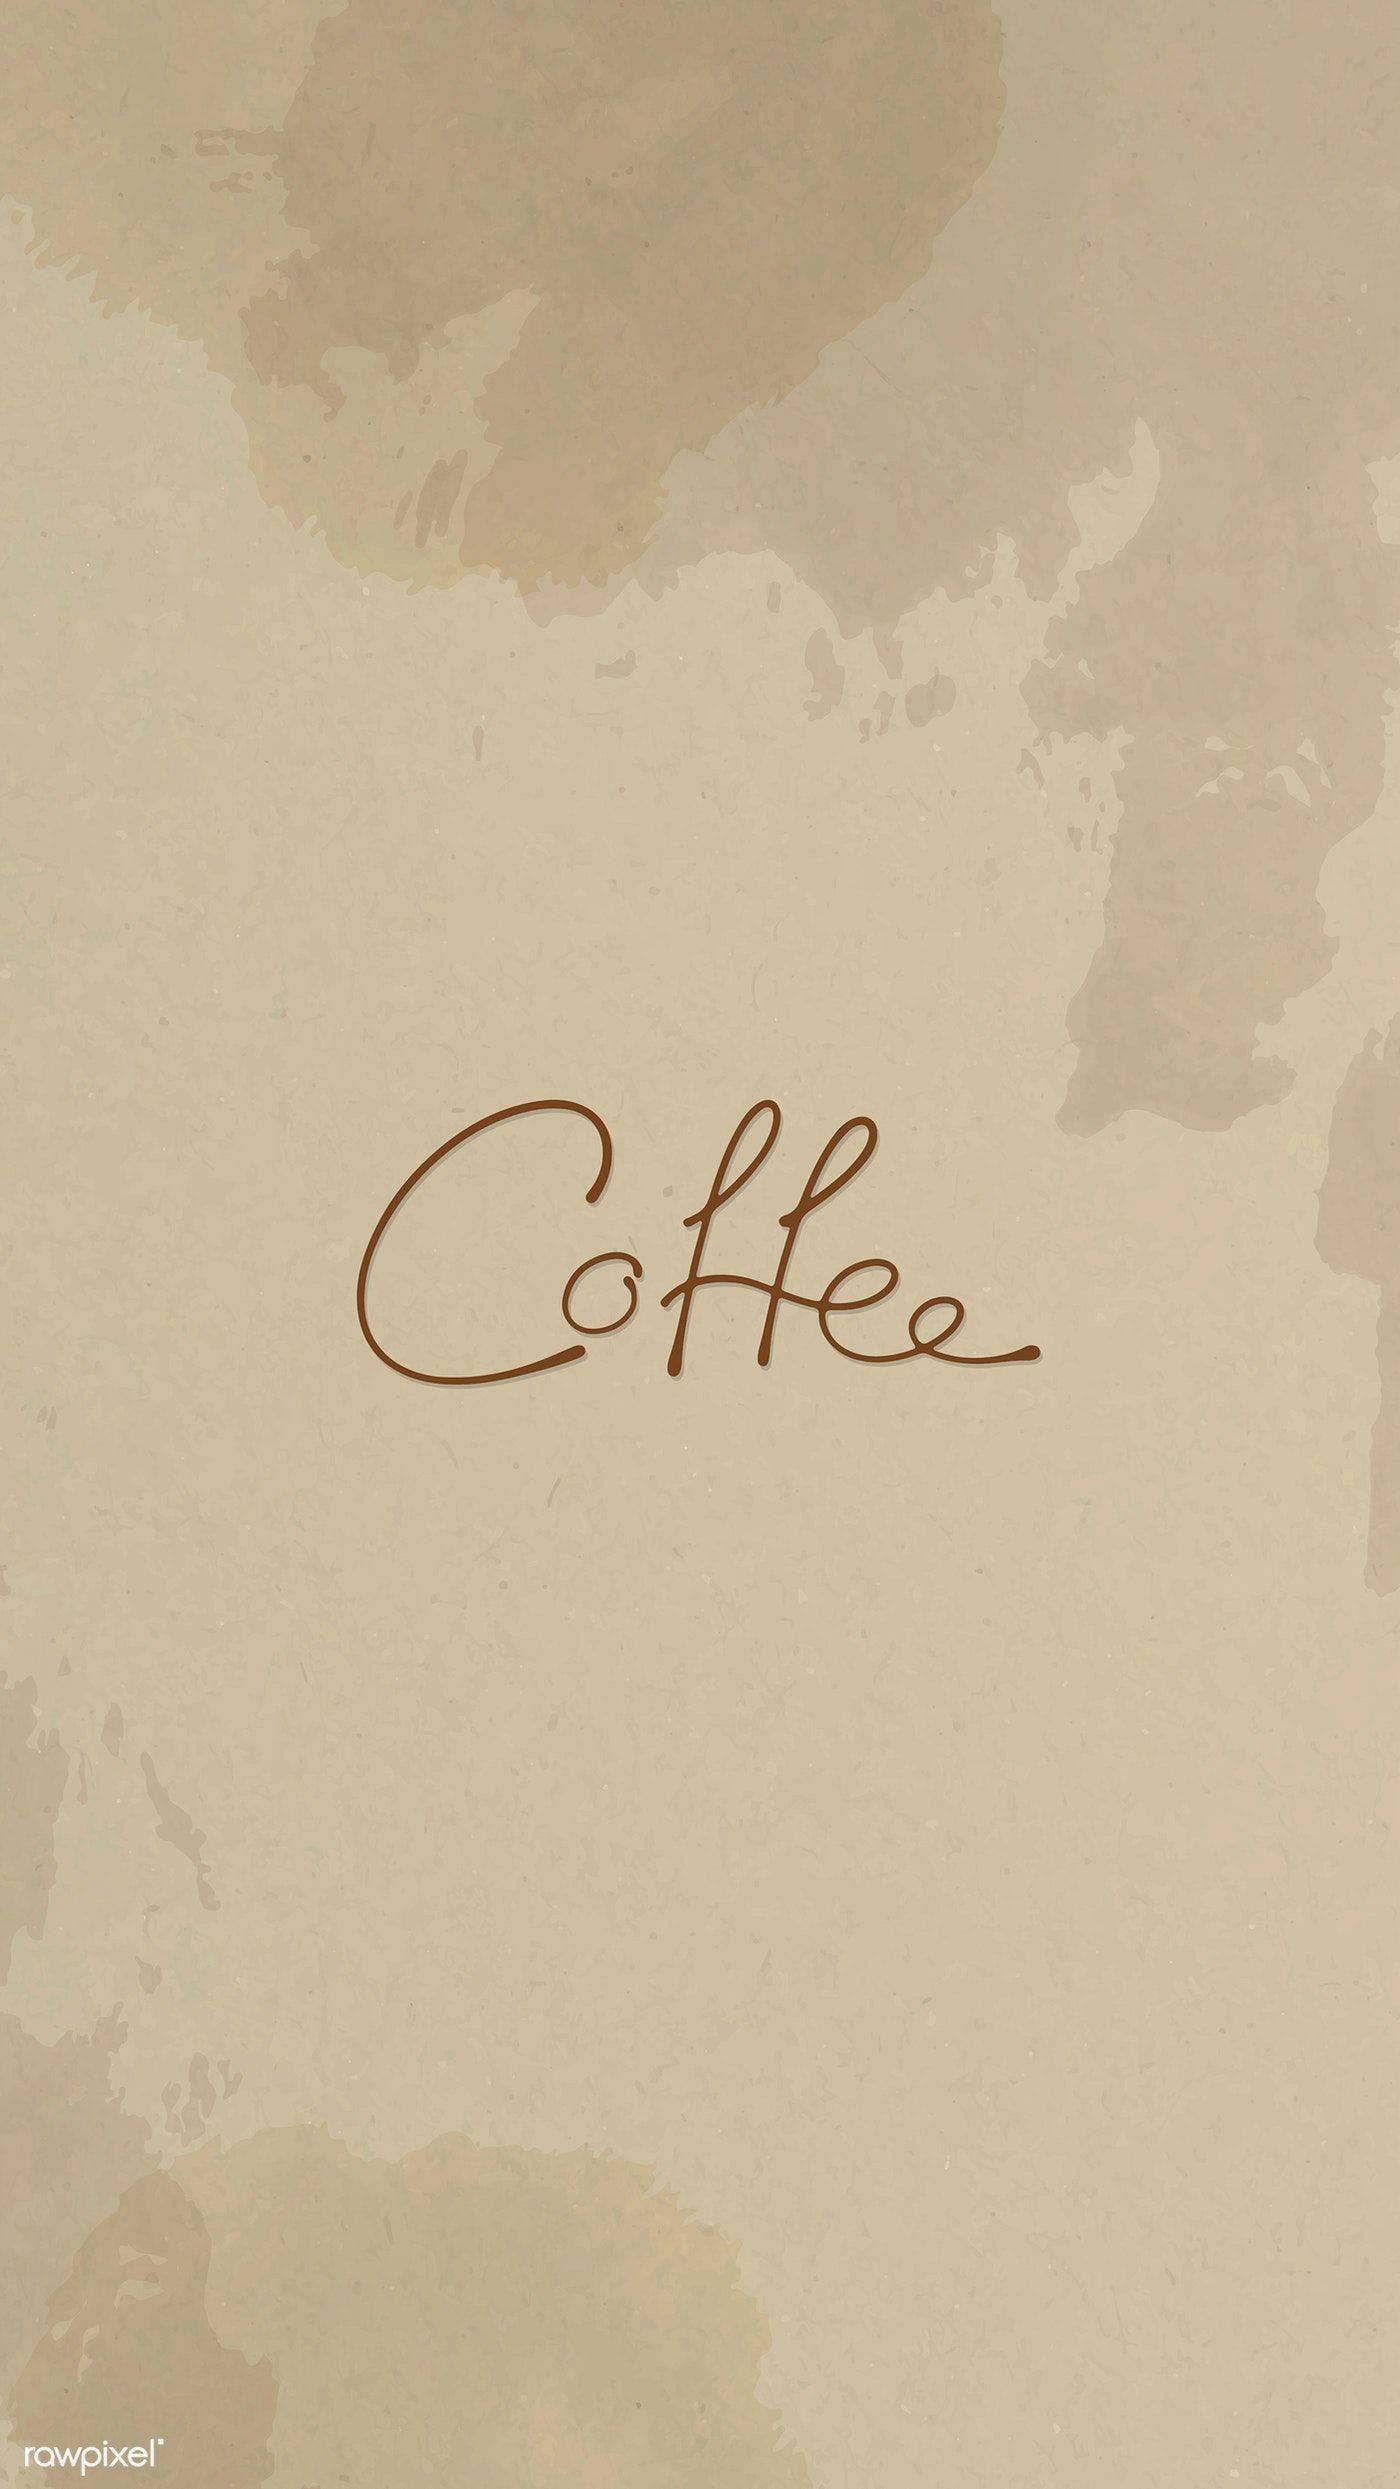 Coffee typography on a beige background mobile wallpaper vector. free image / Kappy. Coffee typography, Coffee wallpaper iphone, Beige background